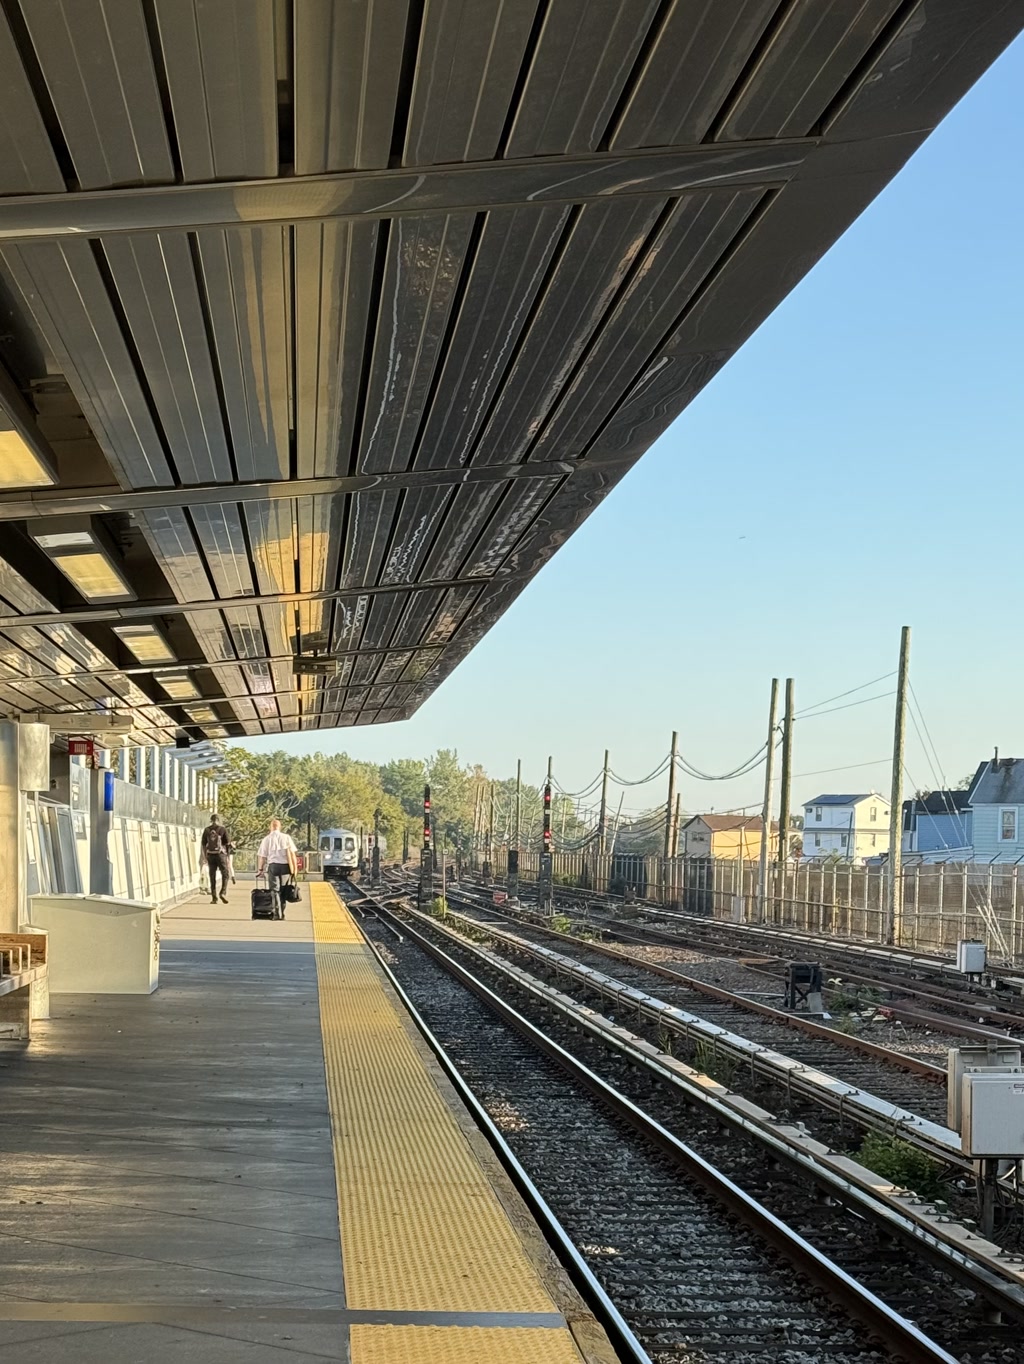 A train station platform during daytime with clear skies. The platform is equipped with benches and a tactile paving path for accessibility. Multiple rail tracks stretch into the distance, flanked by rows of poles and wires, indicative of an electrified rail system. There is some vegetation and residential buildings visible beyond the tracks on the right side. Two individuals are walking on the platform; one is pulling a suitcase. The structural features include a metal roof overhead and modern lighting fixtures. There's no visible text.